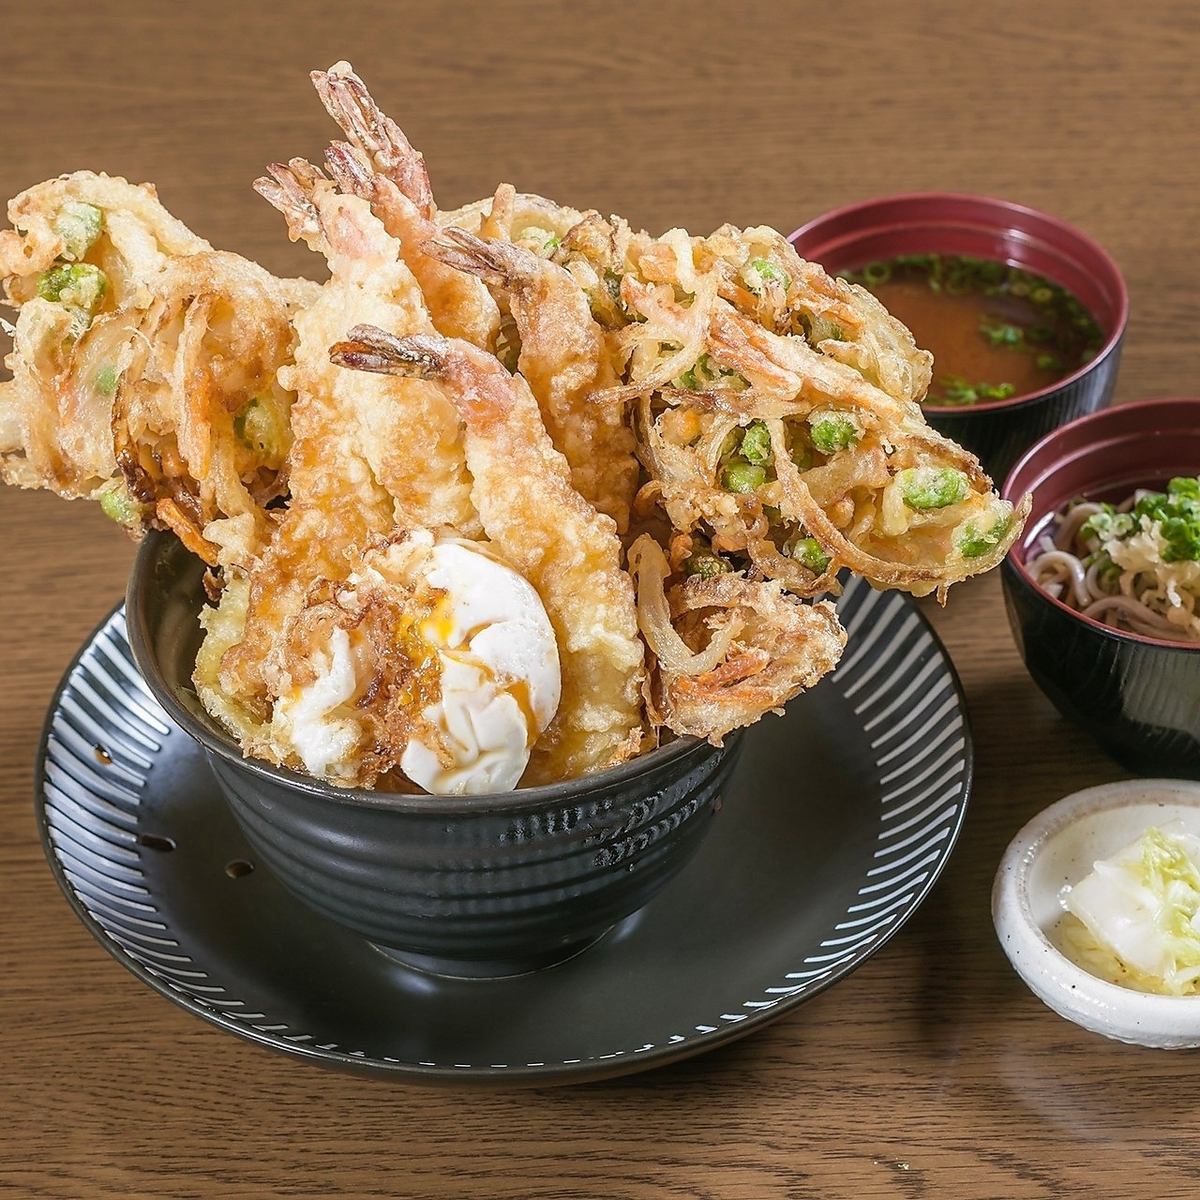 A public bar serving tempura and Japanese sake, open only for lunch